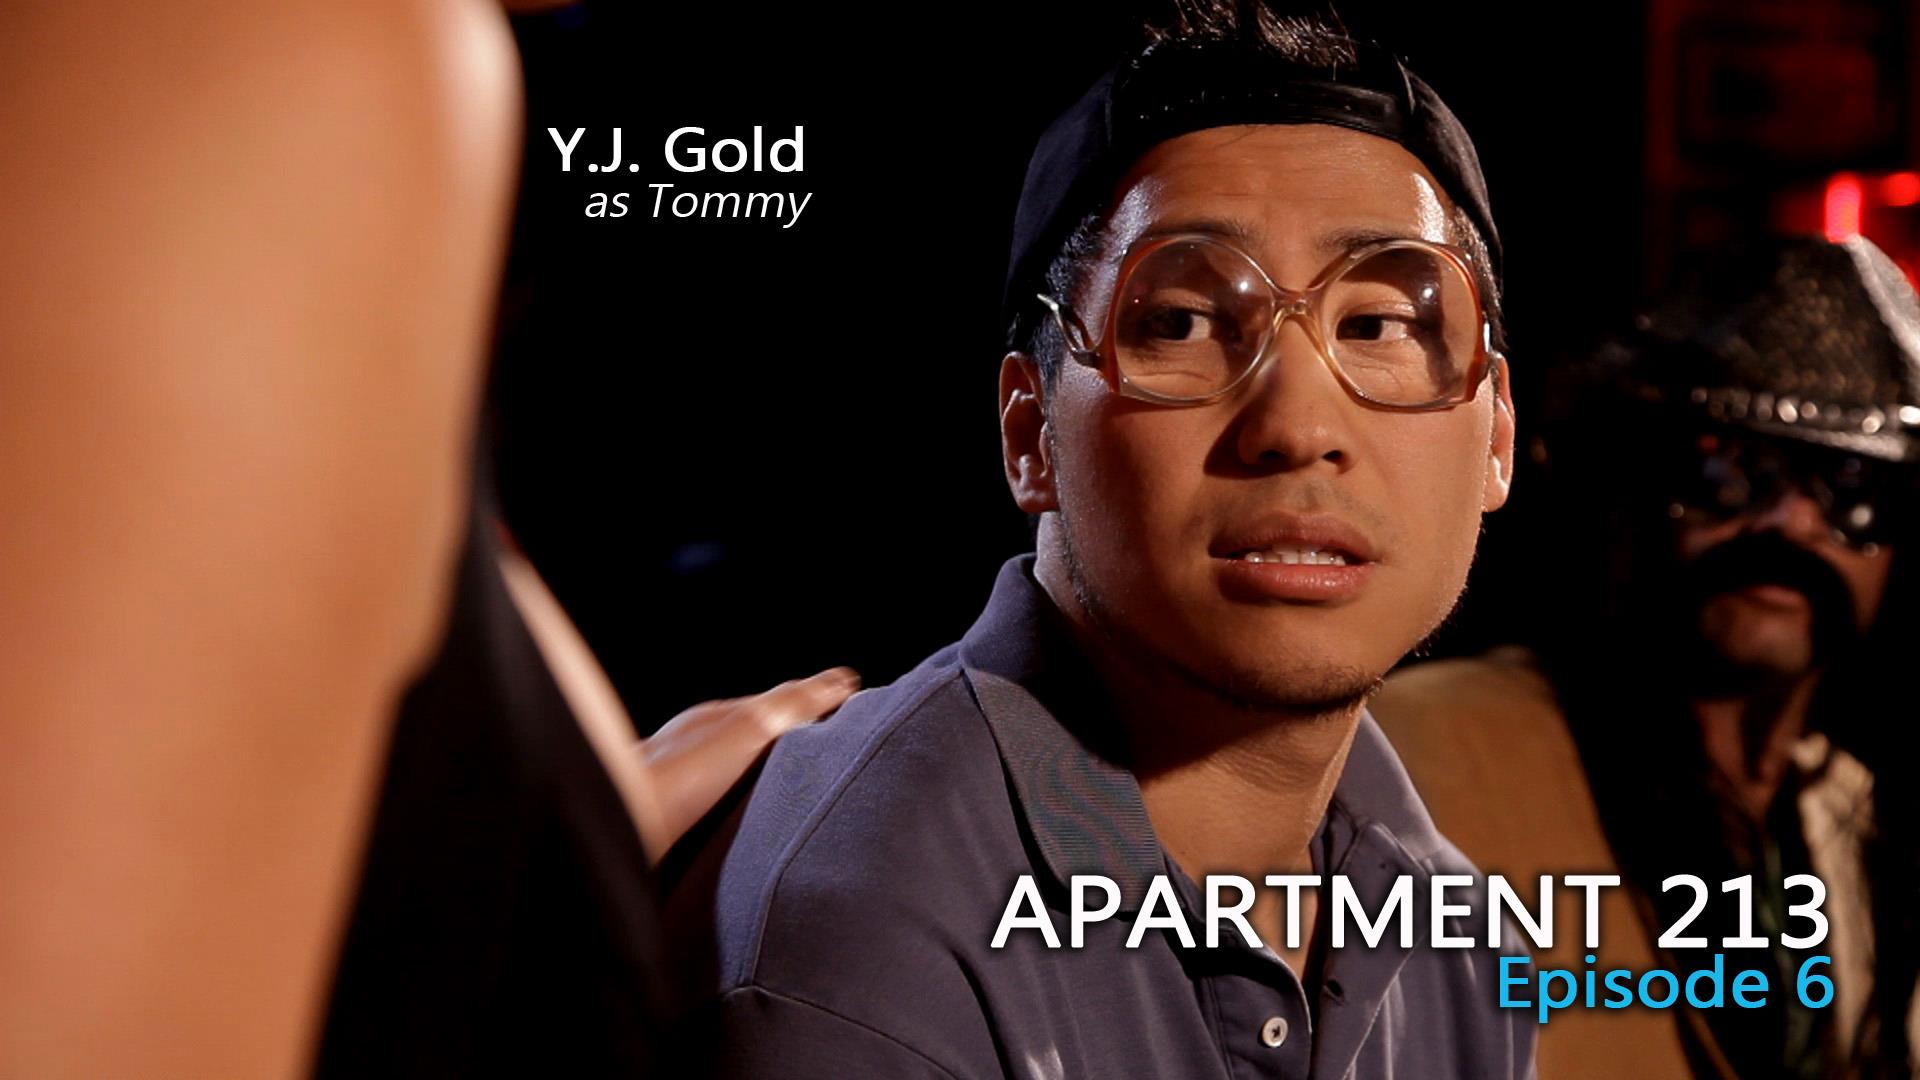 Y.J. Gold as Tommy in Episode 6 of Apartment 213.